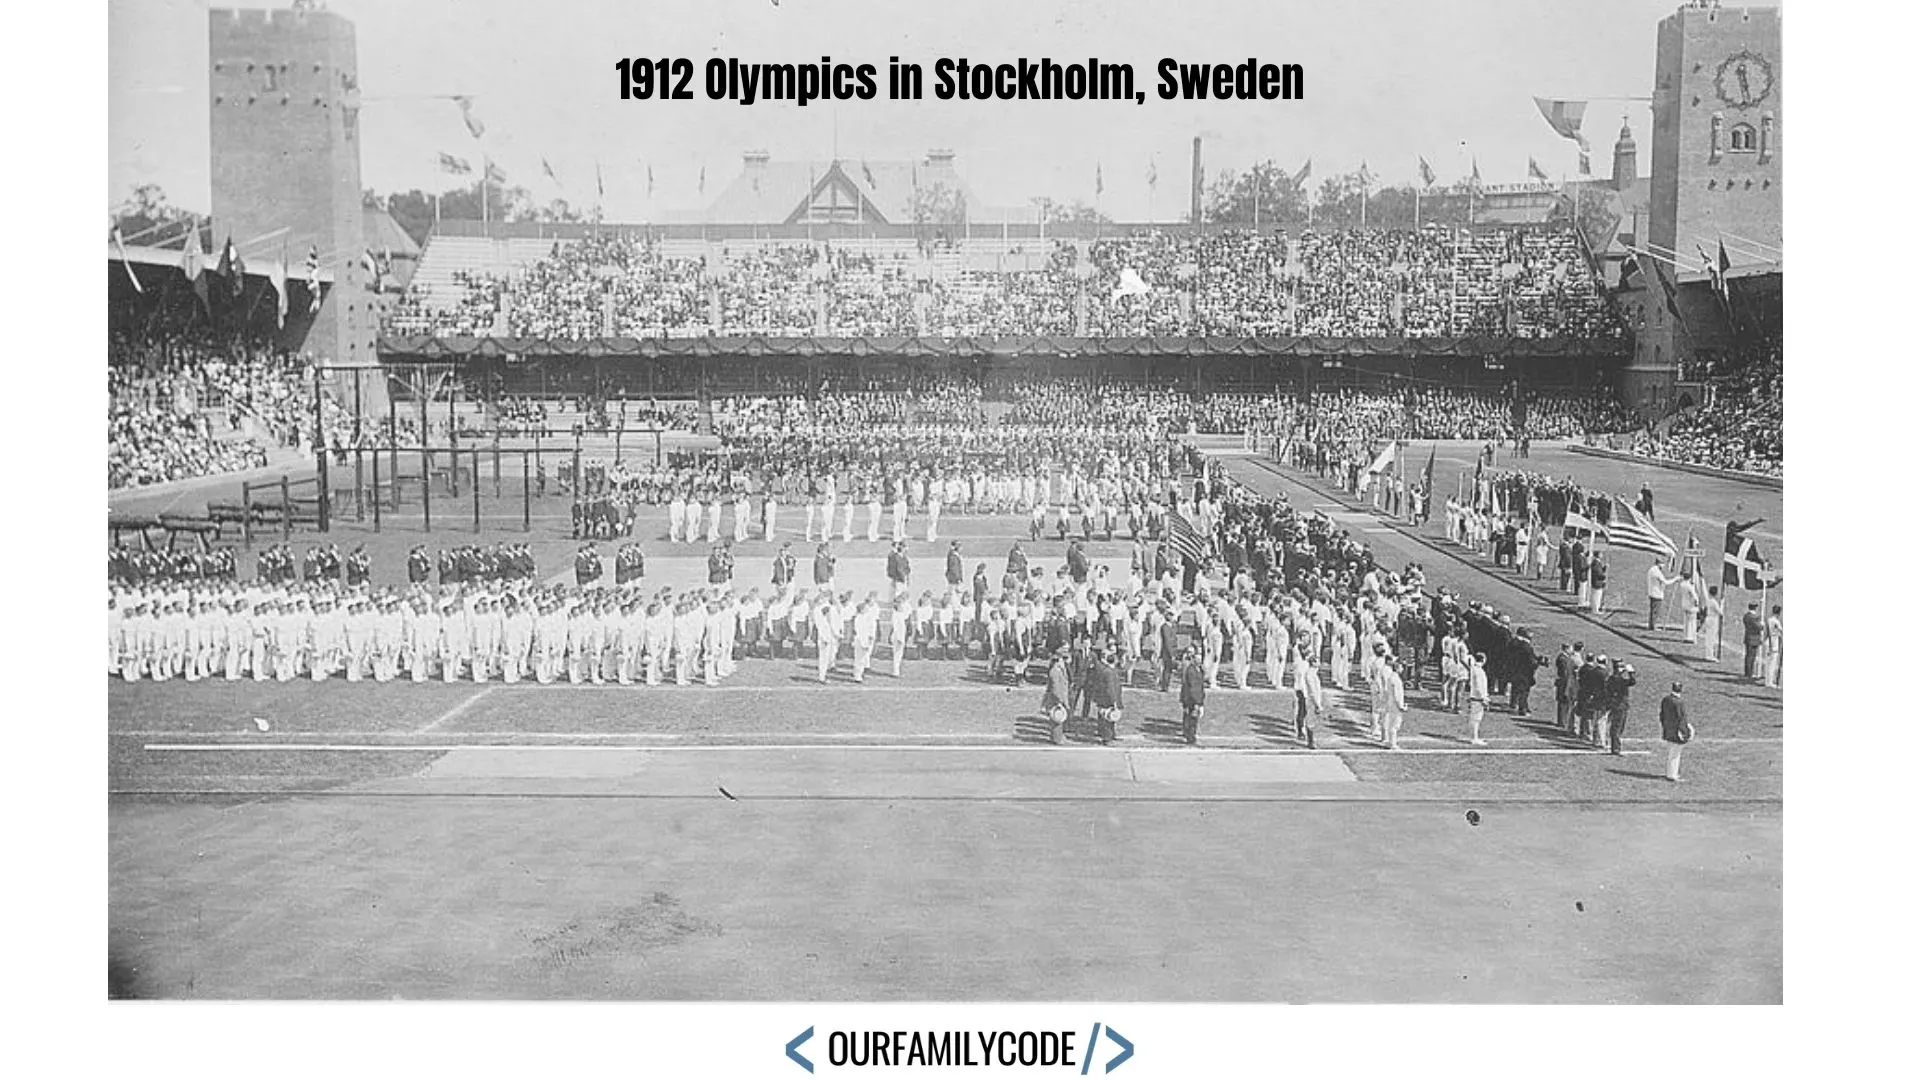 A picture of the opening ceremony of the 5th Olympic Games held in Stockholm, Sweden in 1912.